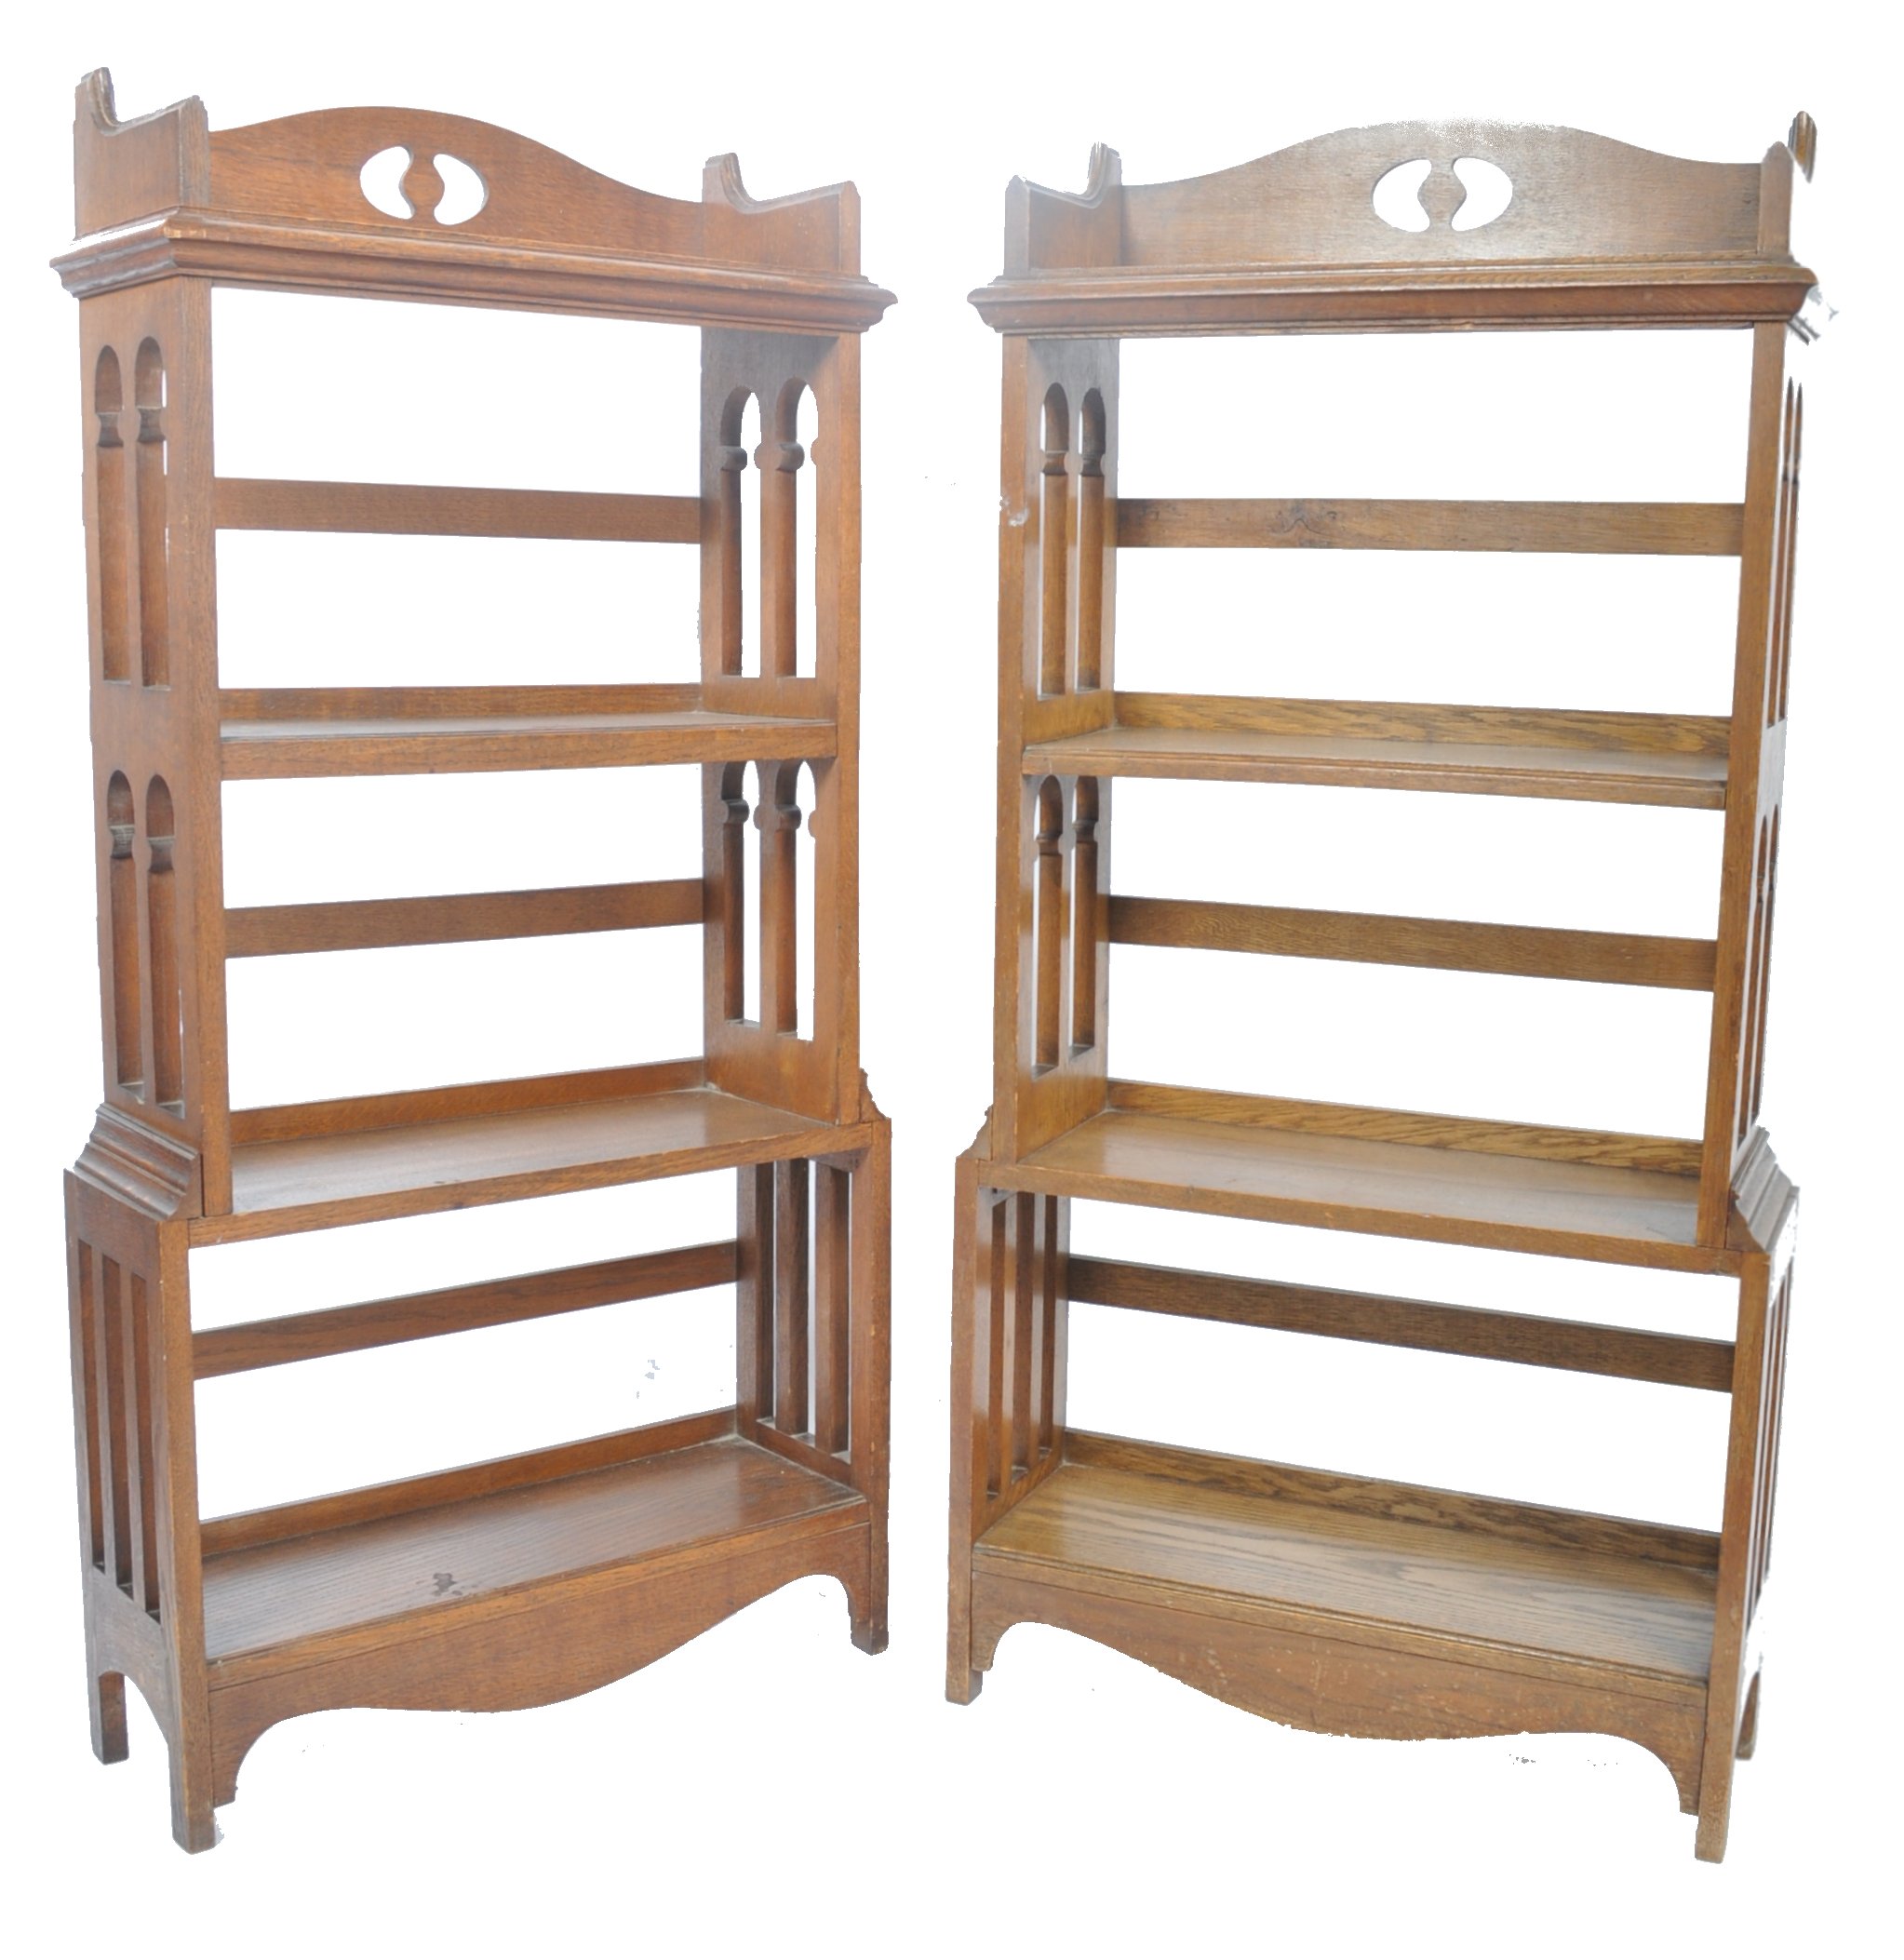 PAIR OF EARLY 20TH CENTURY LIBERTY MANNER BOOKCASES